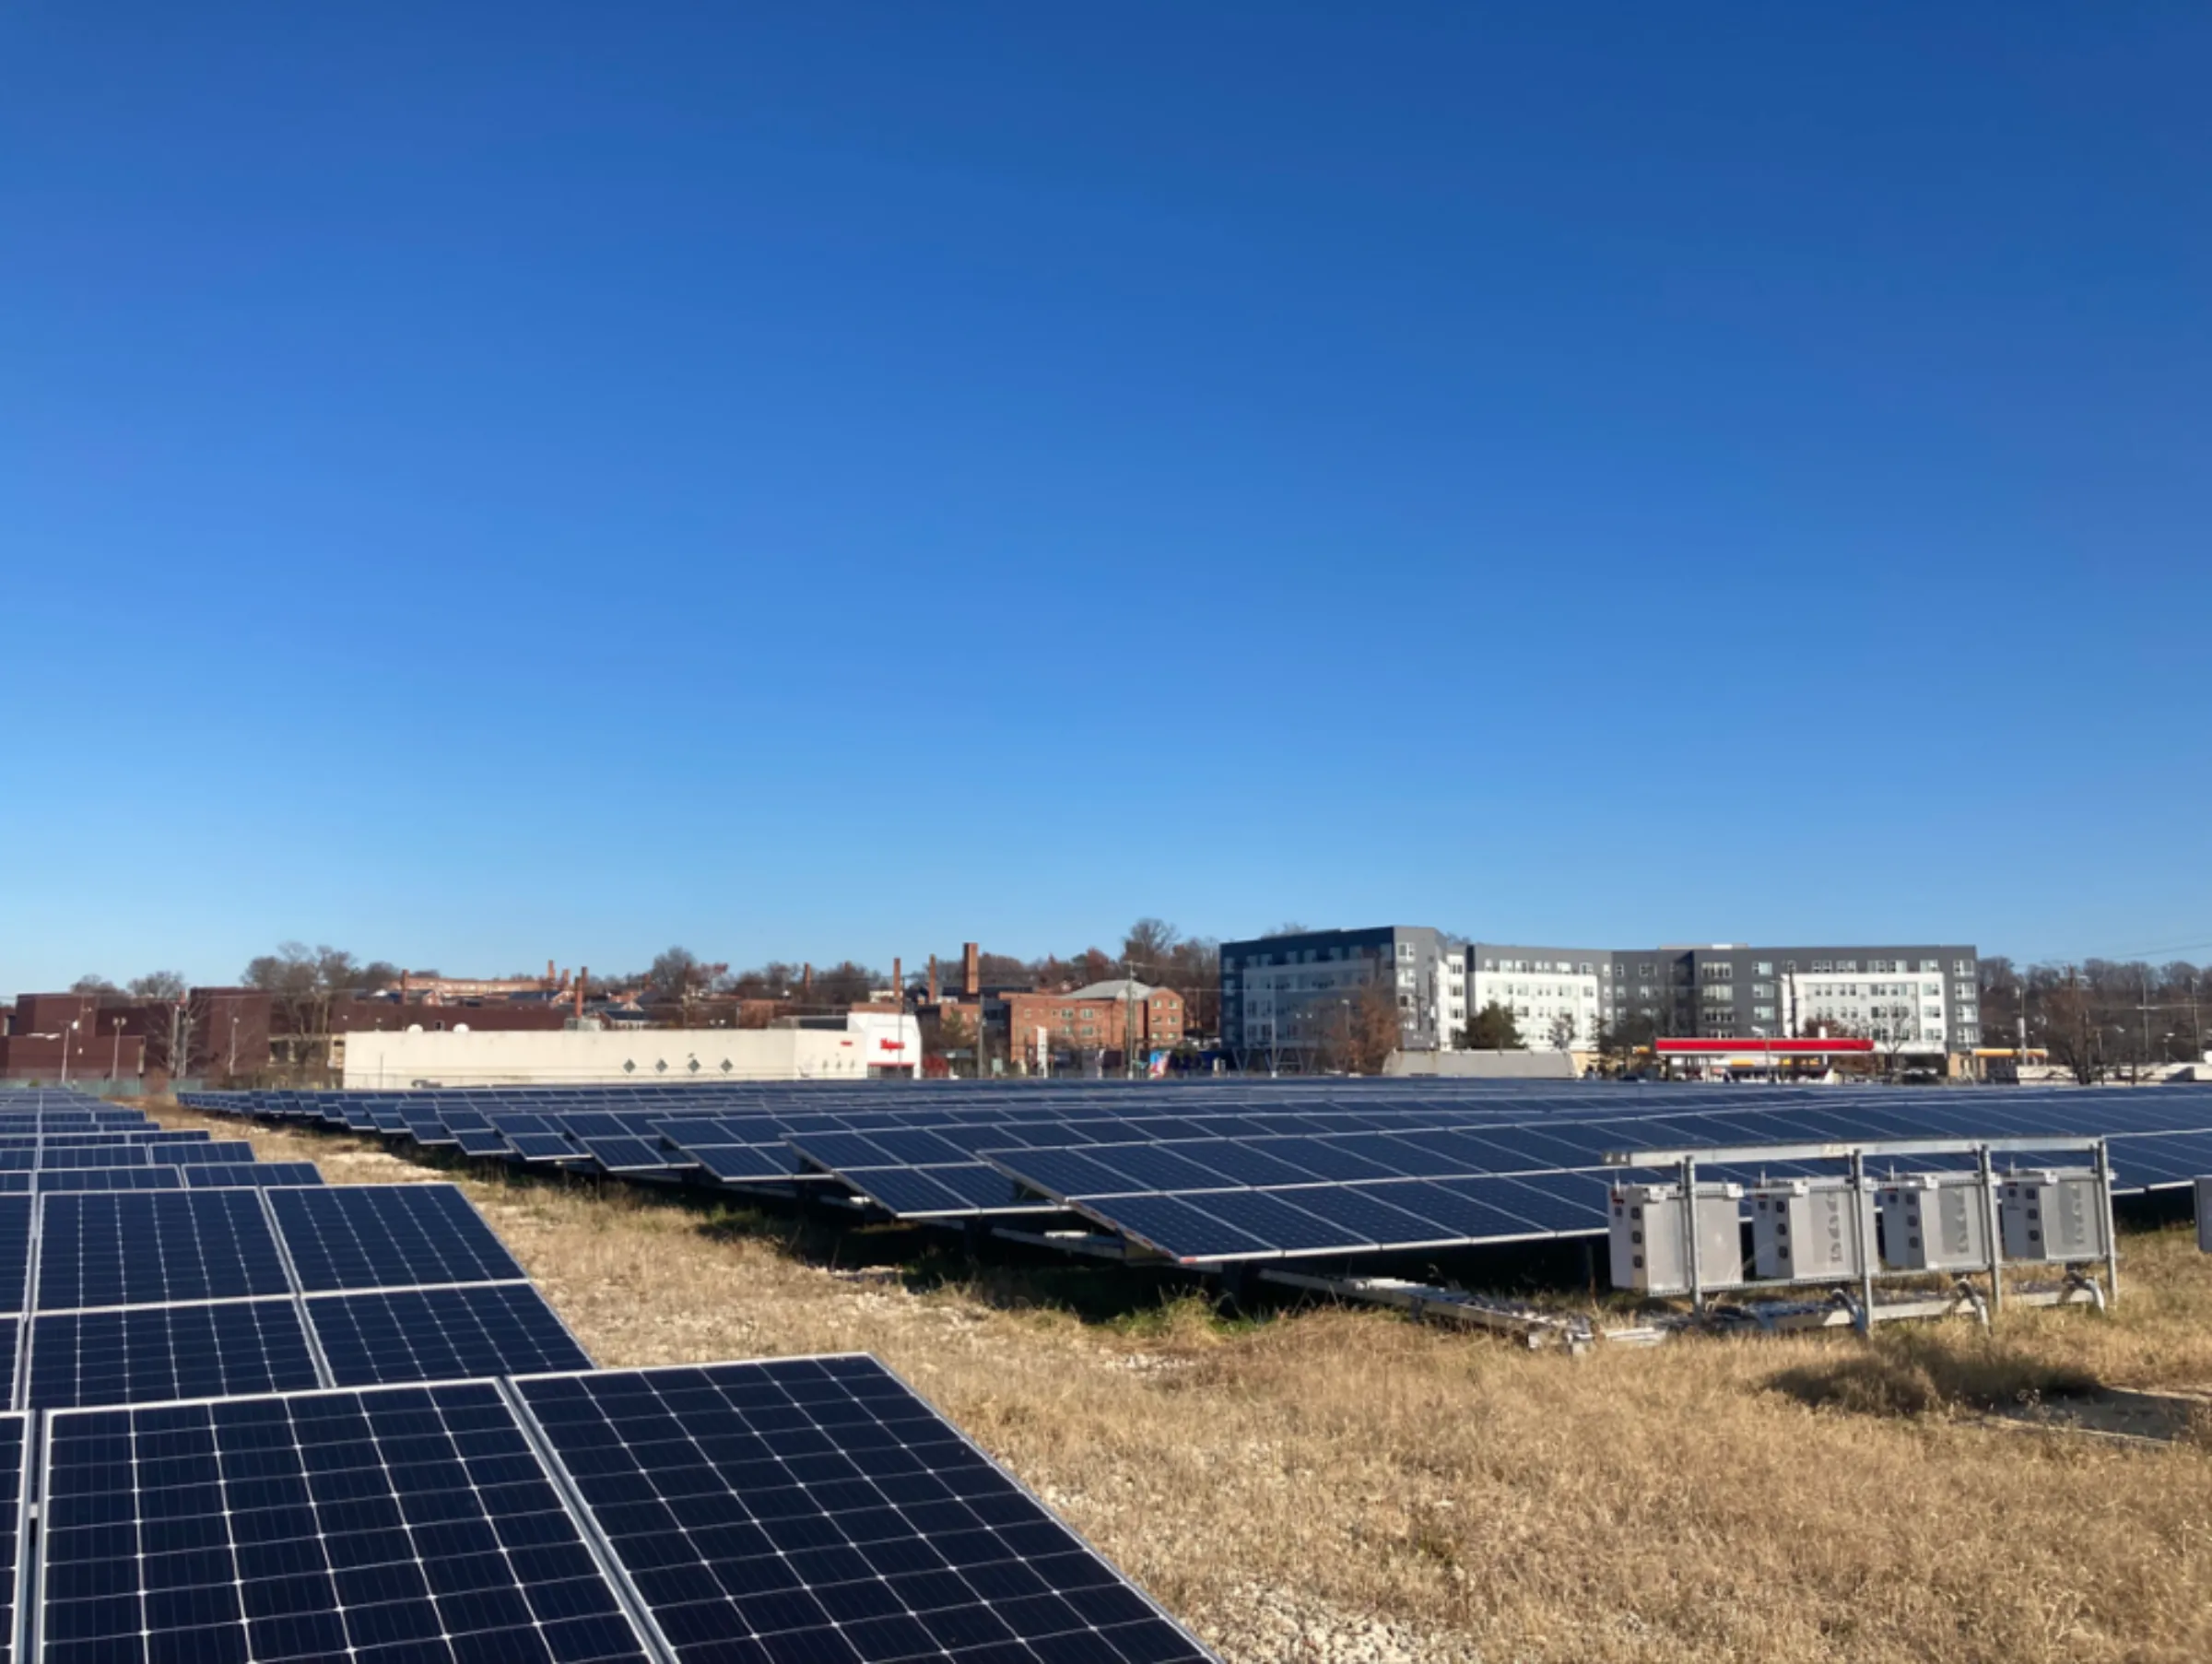 A community solar project in Washington D.C. in December 2022